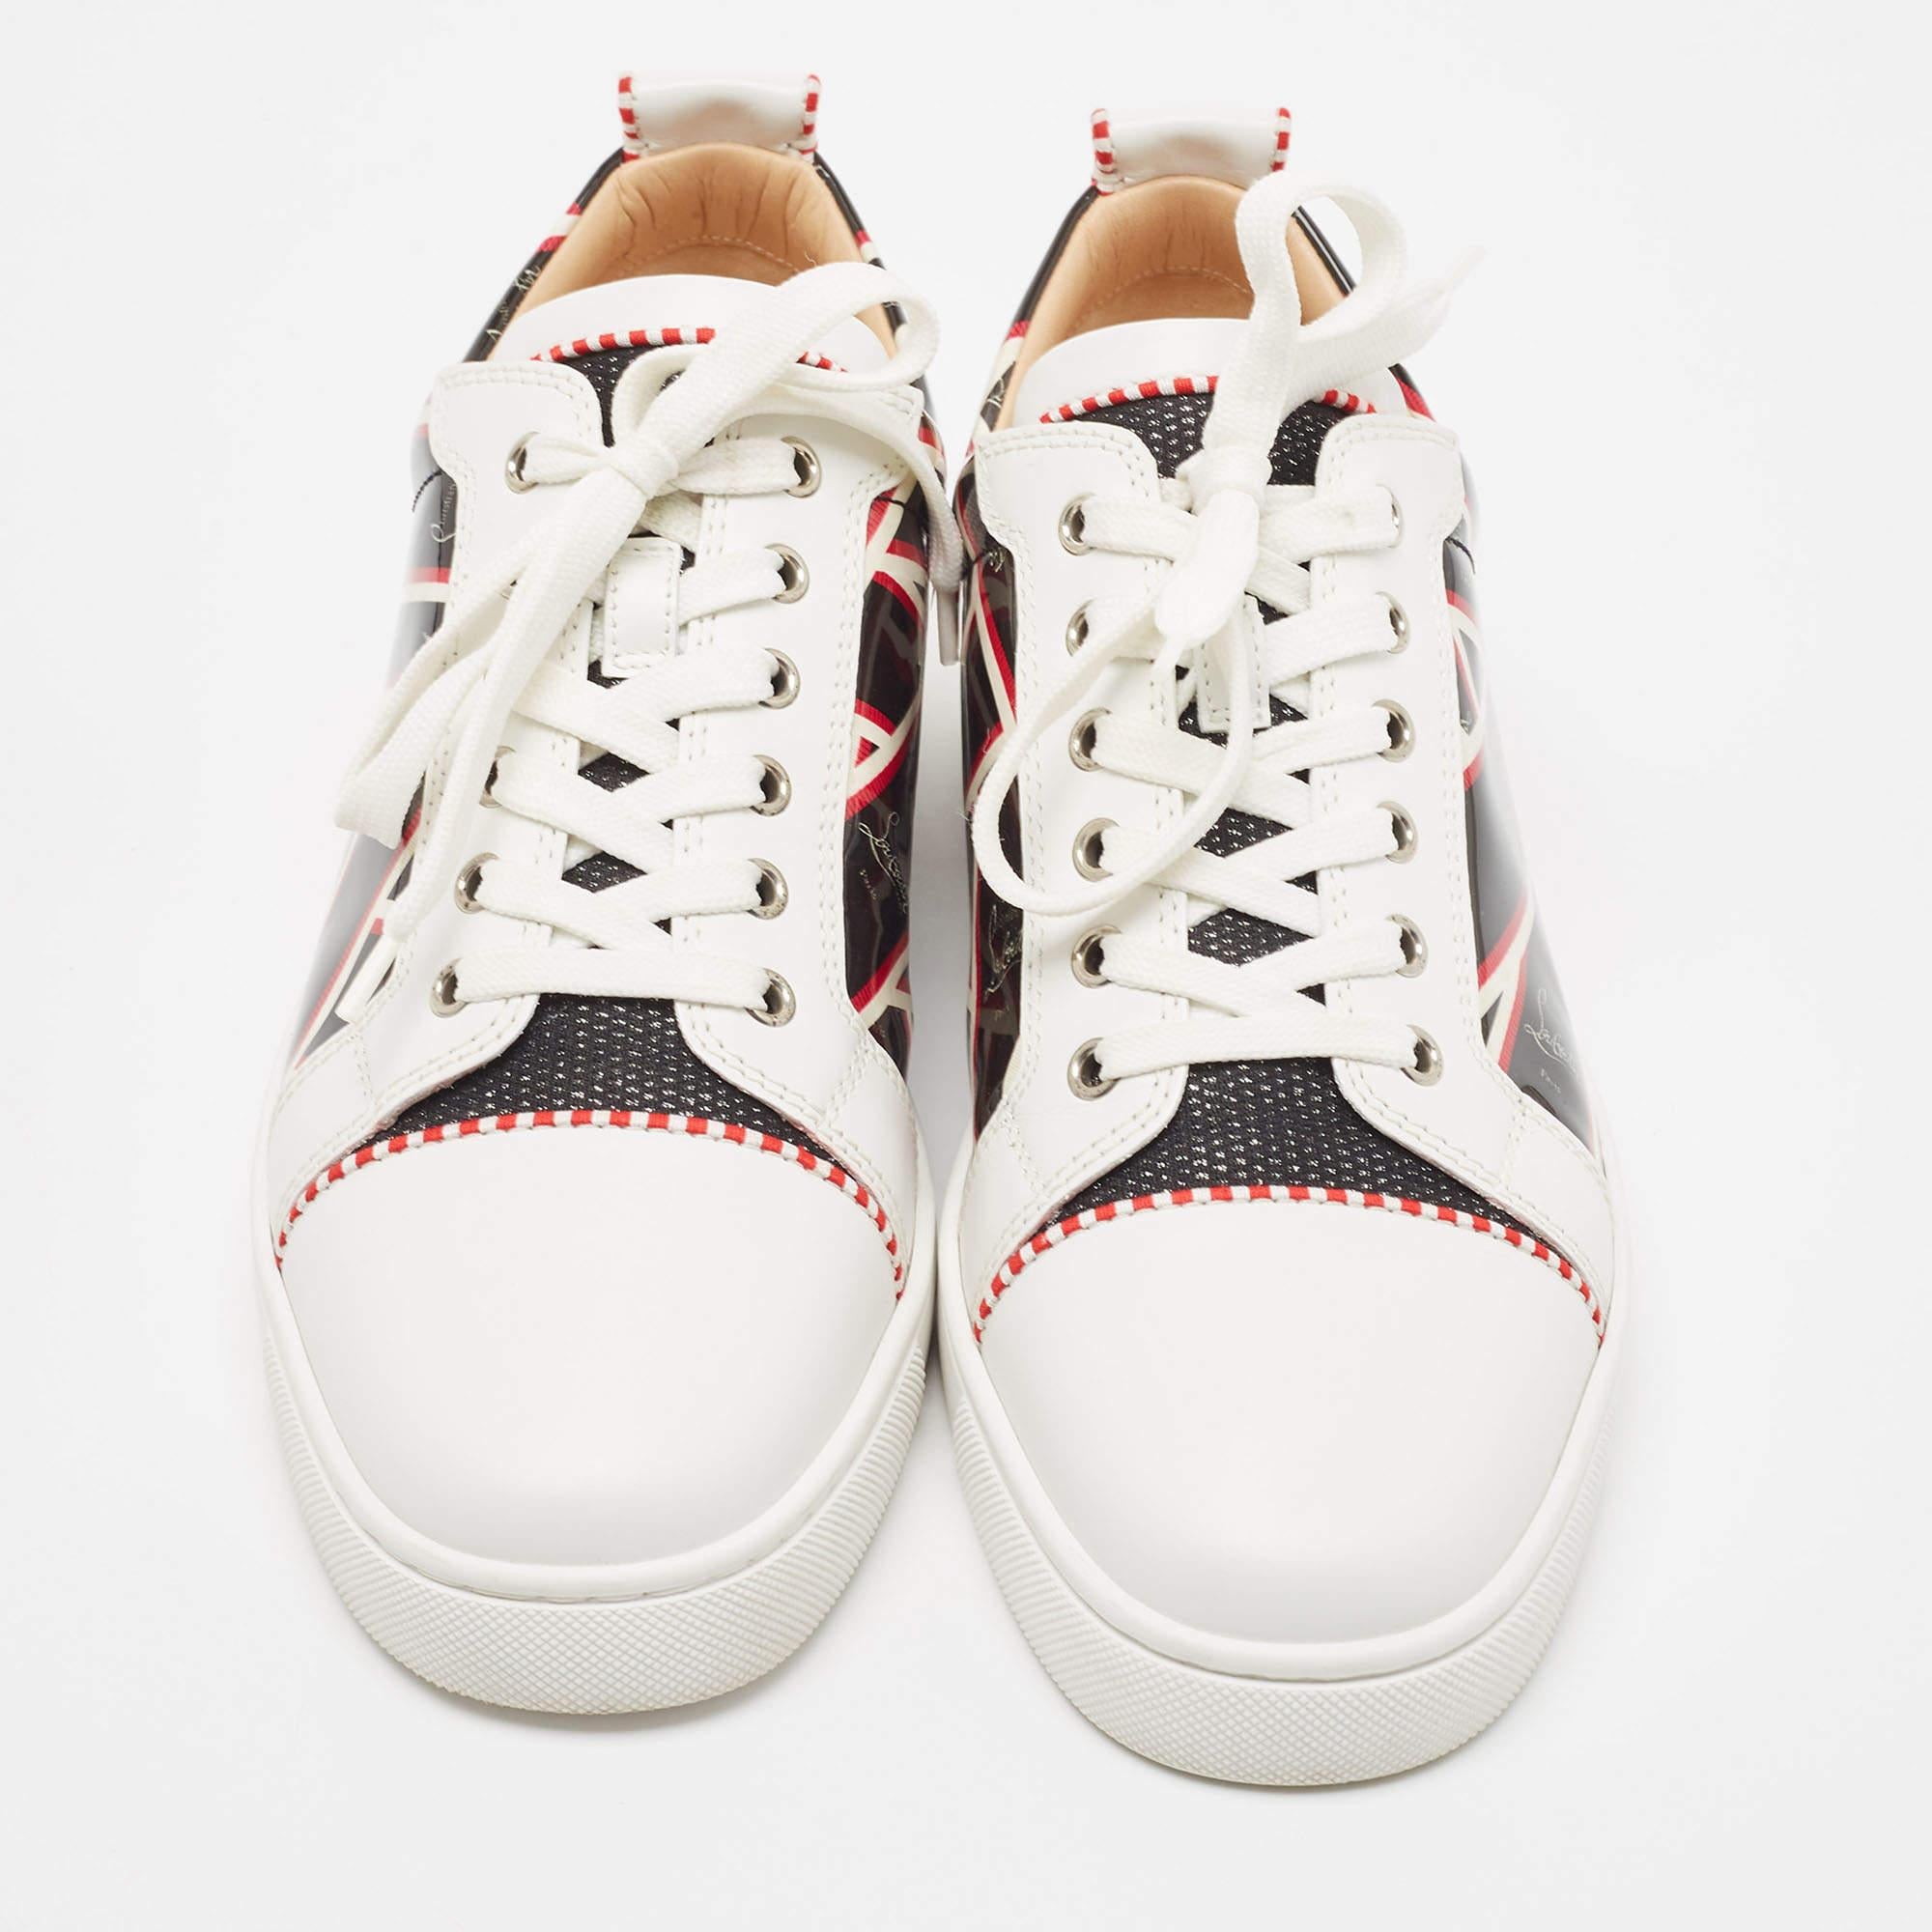 Christian Louboutin Printed Patent and Leather Orlato Sneakers Size 42.5 In Good Condition For Sale In Dubai, Al Qouz 2